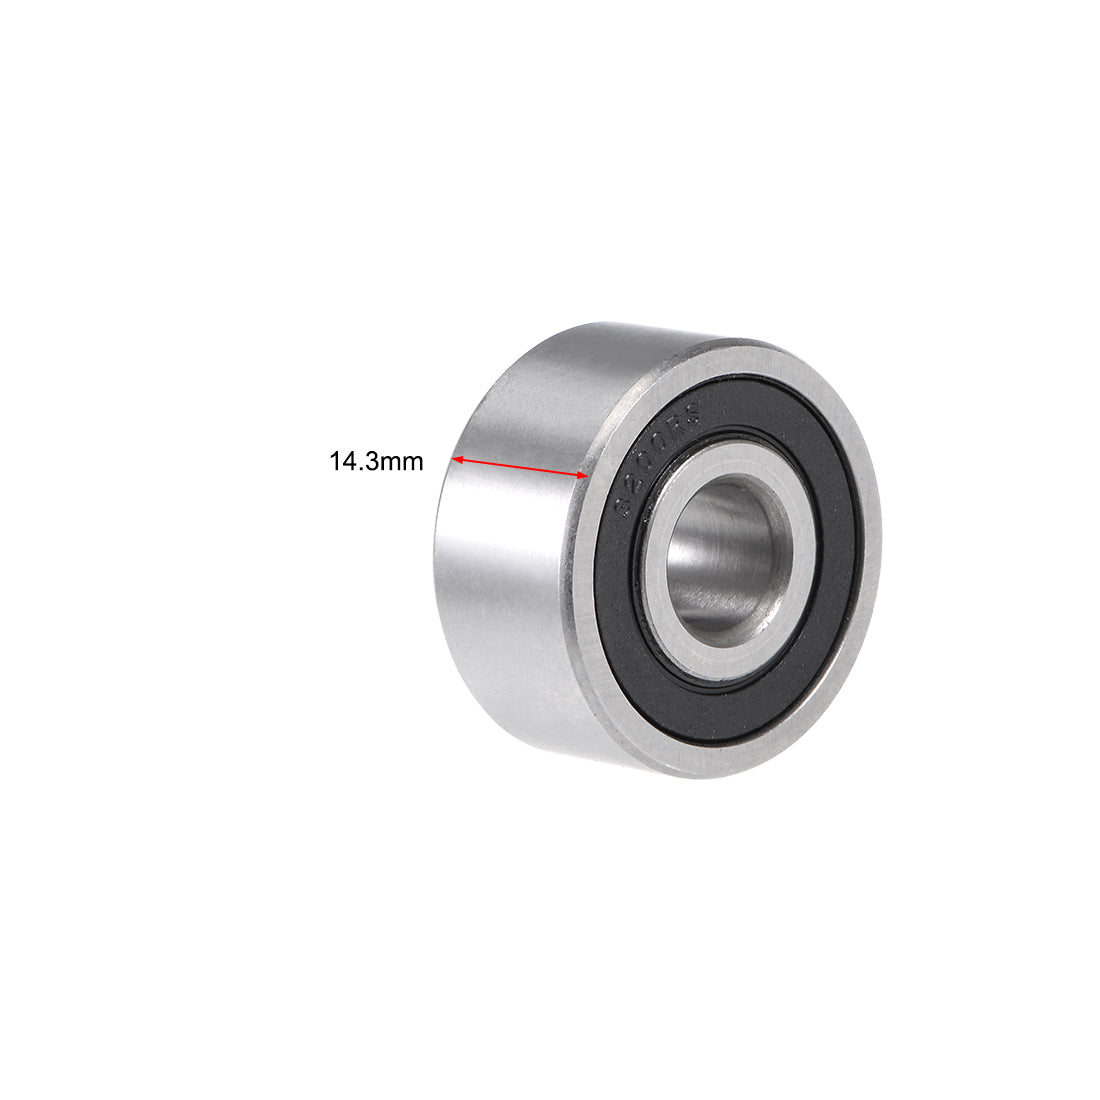 uxcell Uxcell 3200-2RS Angular Contact Ball Bearing 10mmx30mmx14.3mm Sealed Bearings 5200-2RS 2pcs